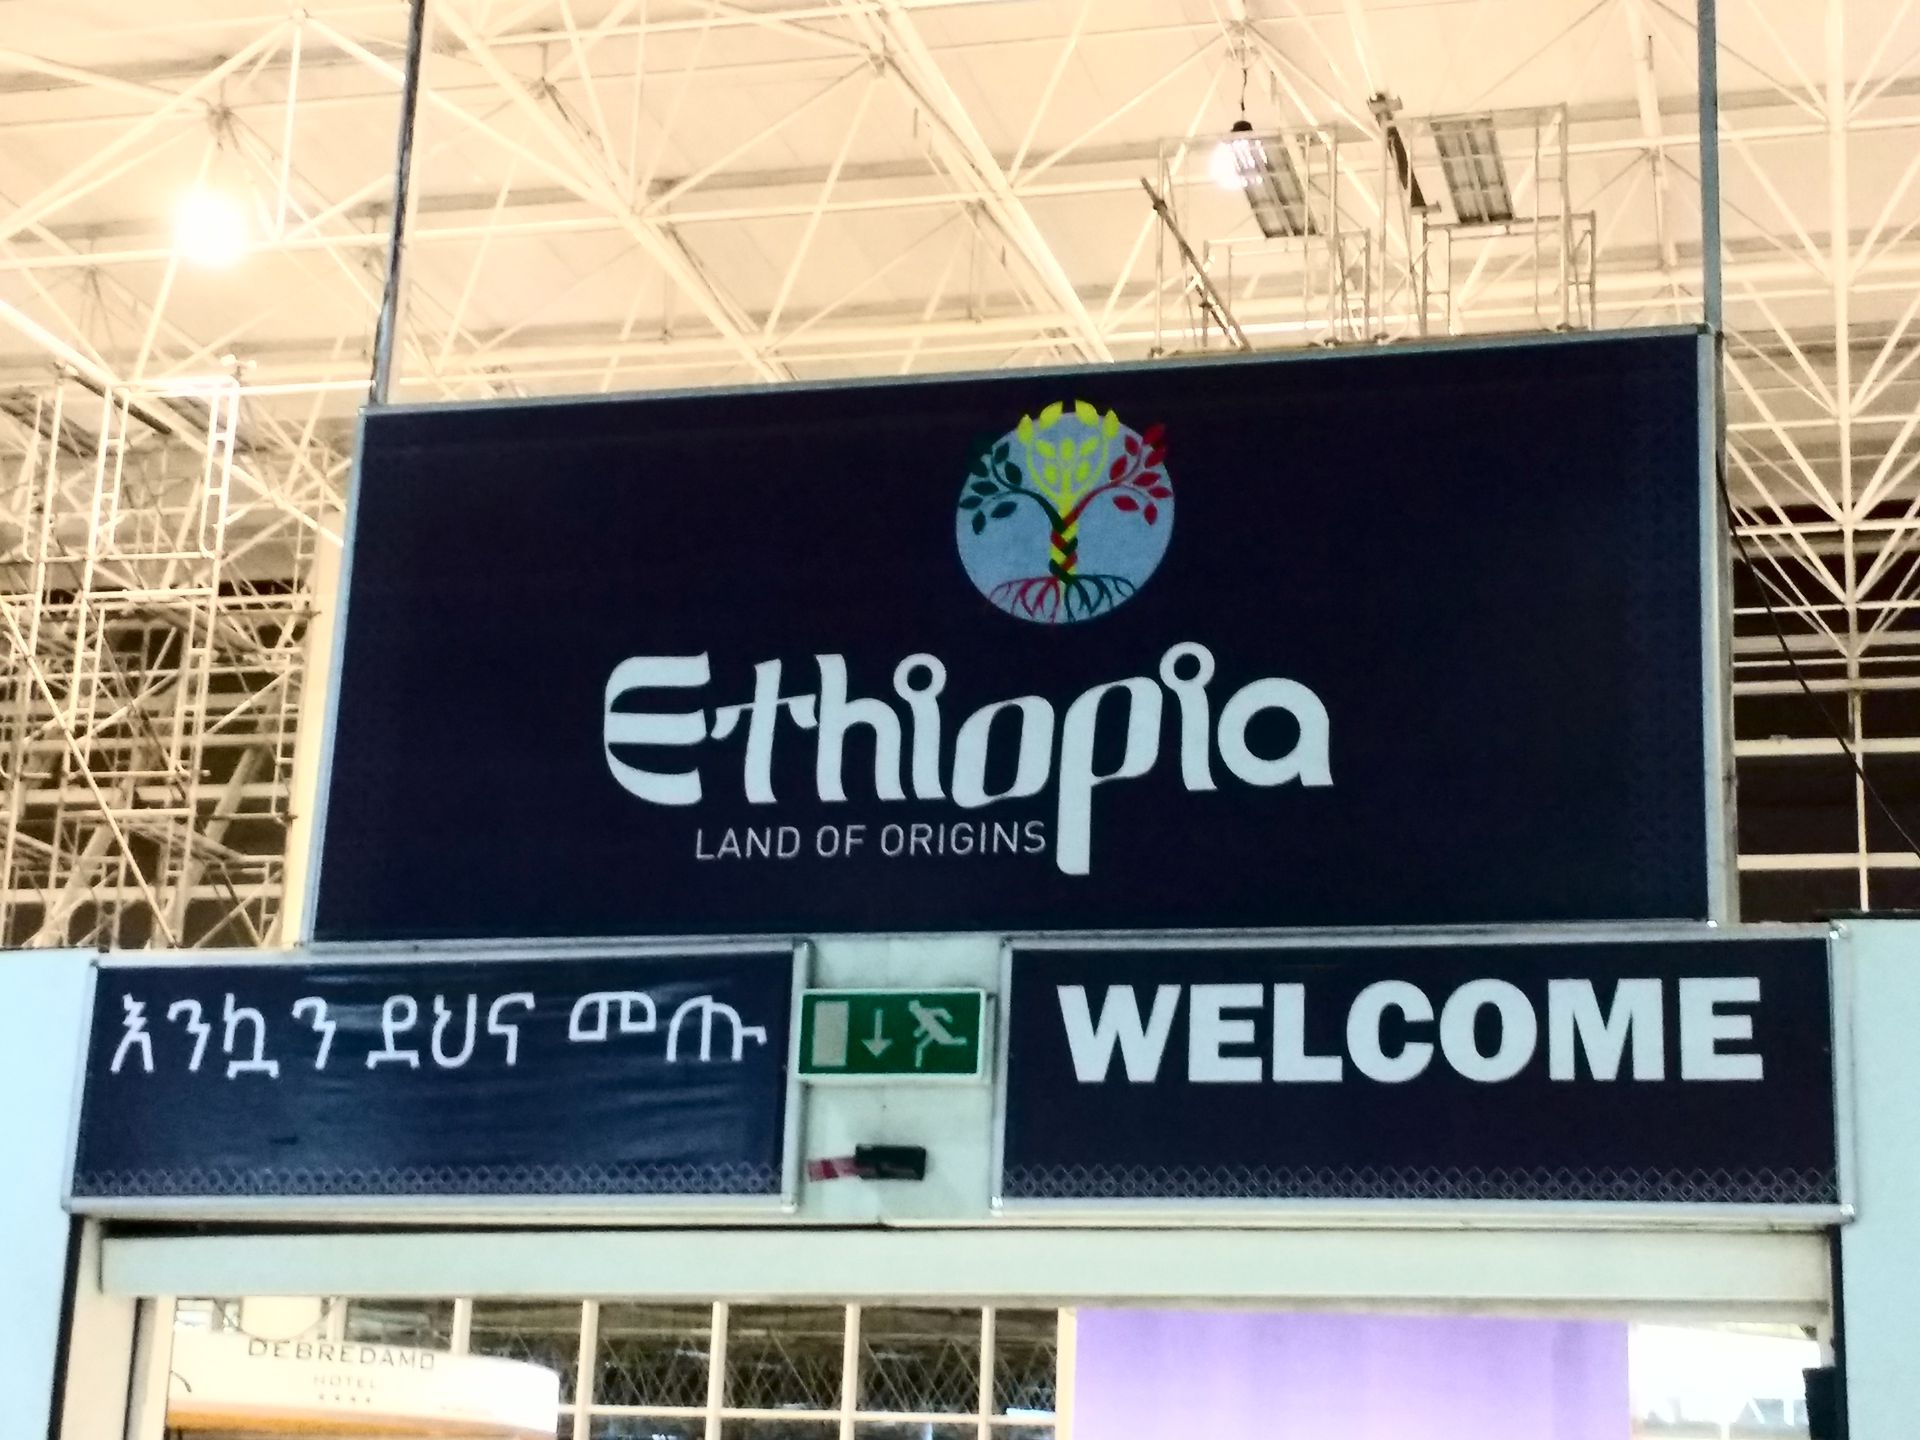 Welcome to Ethiopia!